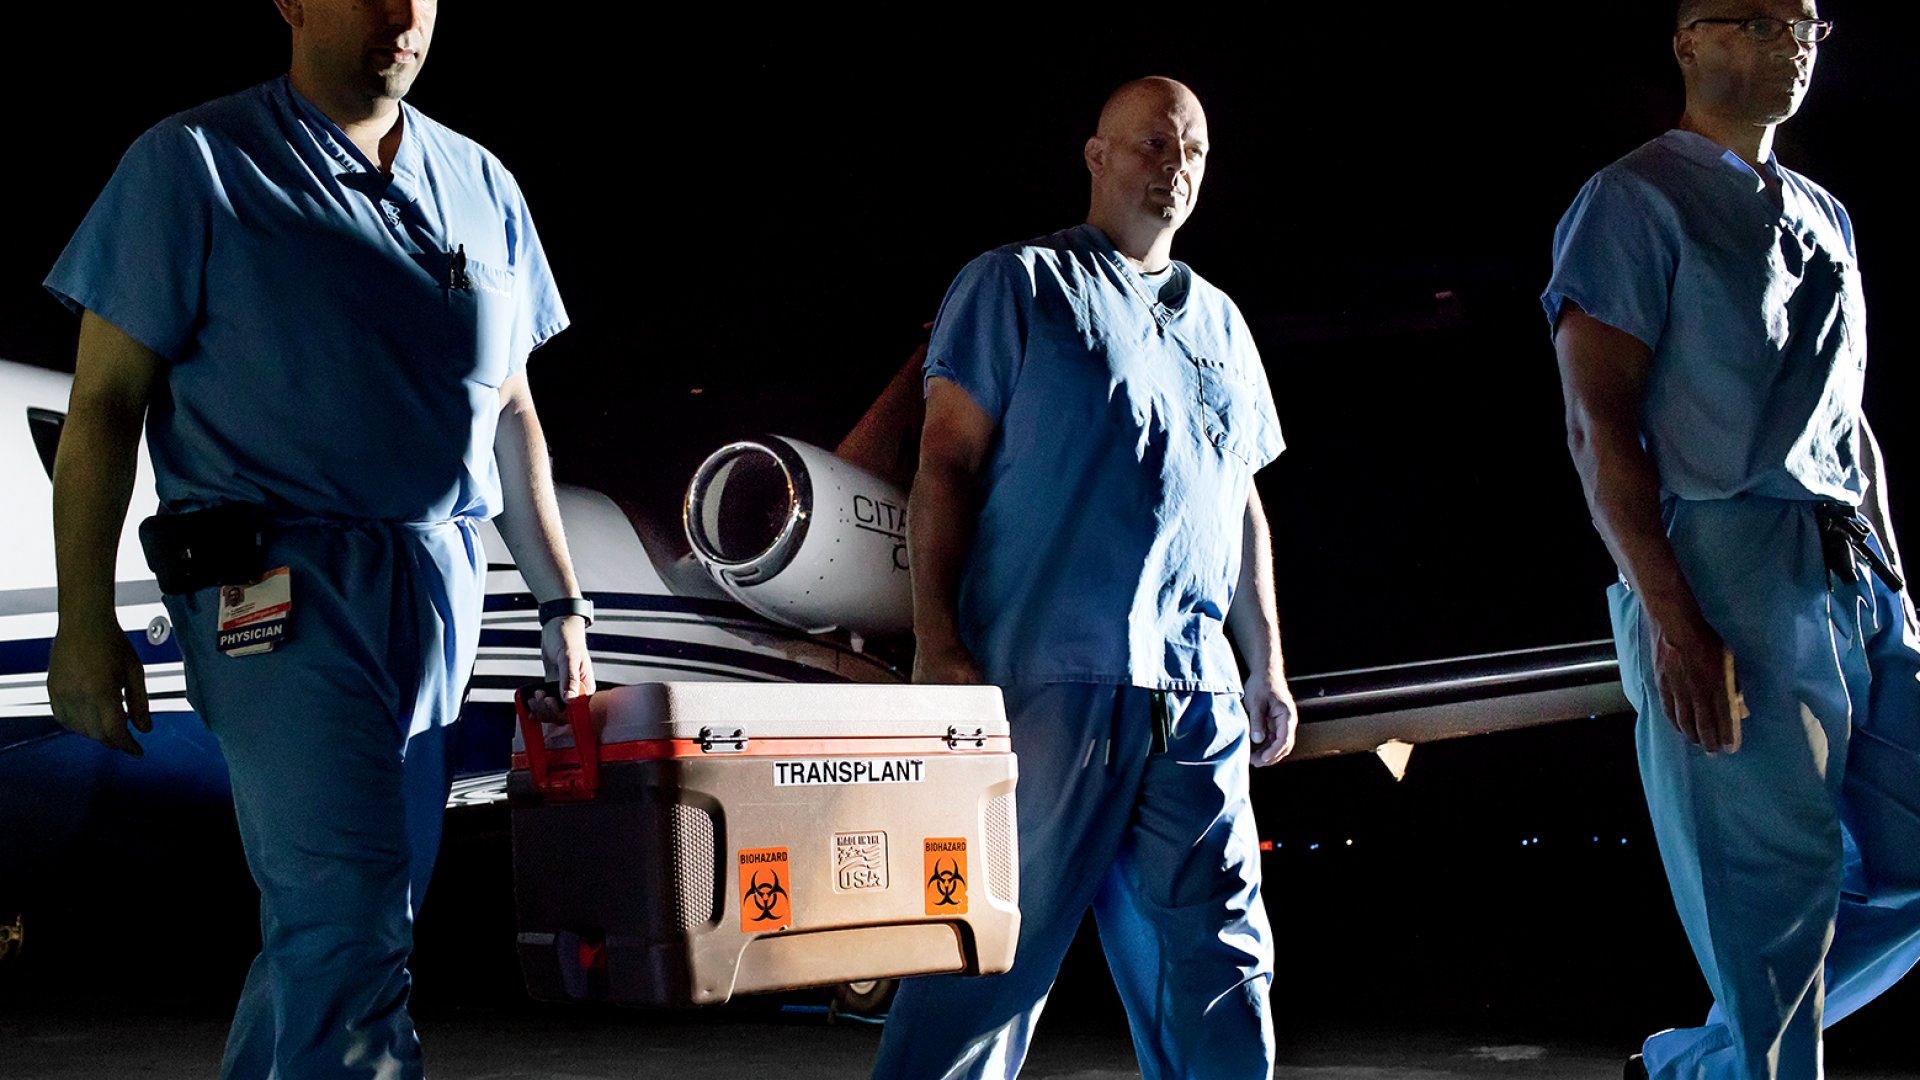 The Role Of Air Ambulances In Organ Transplants